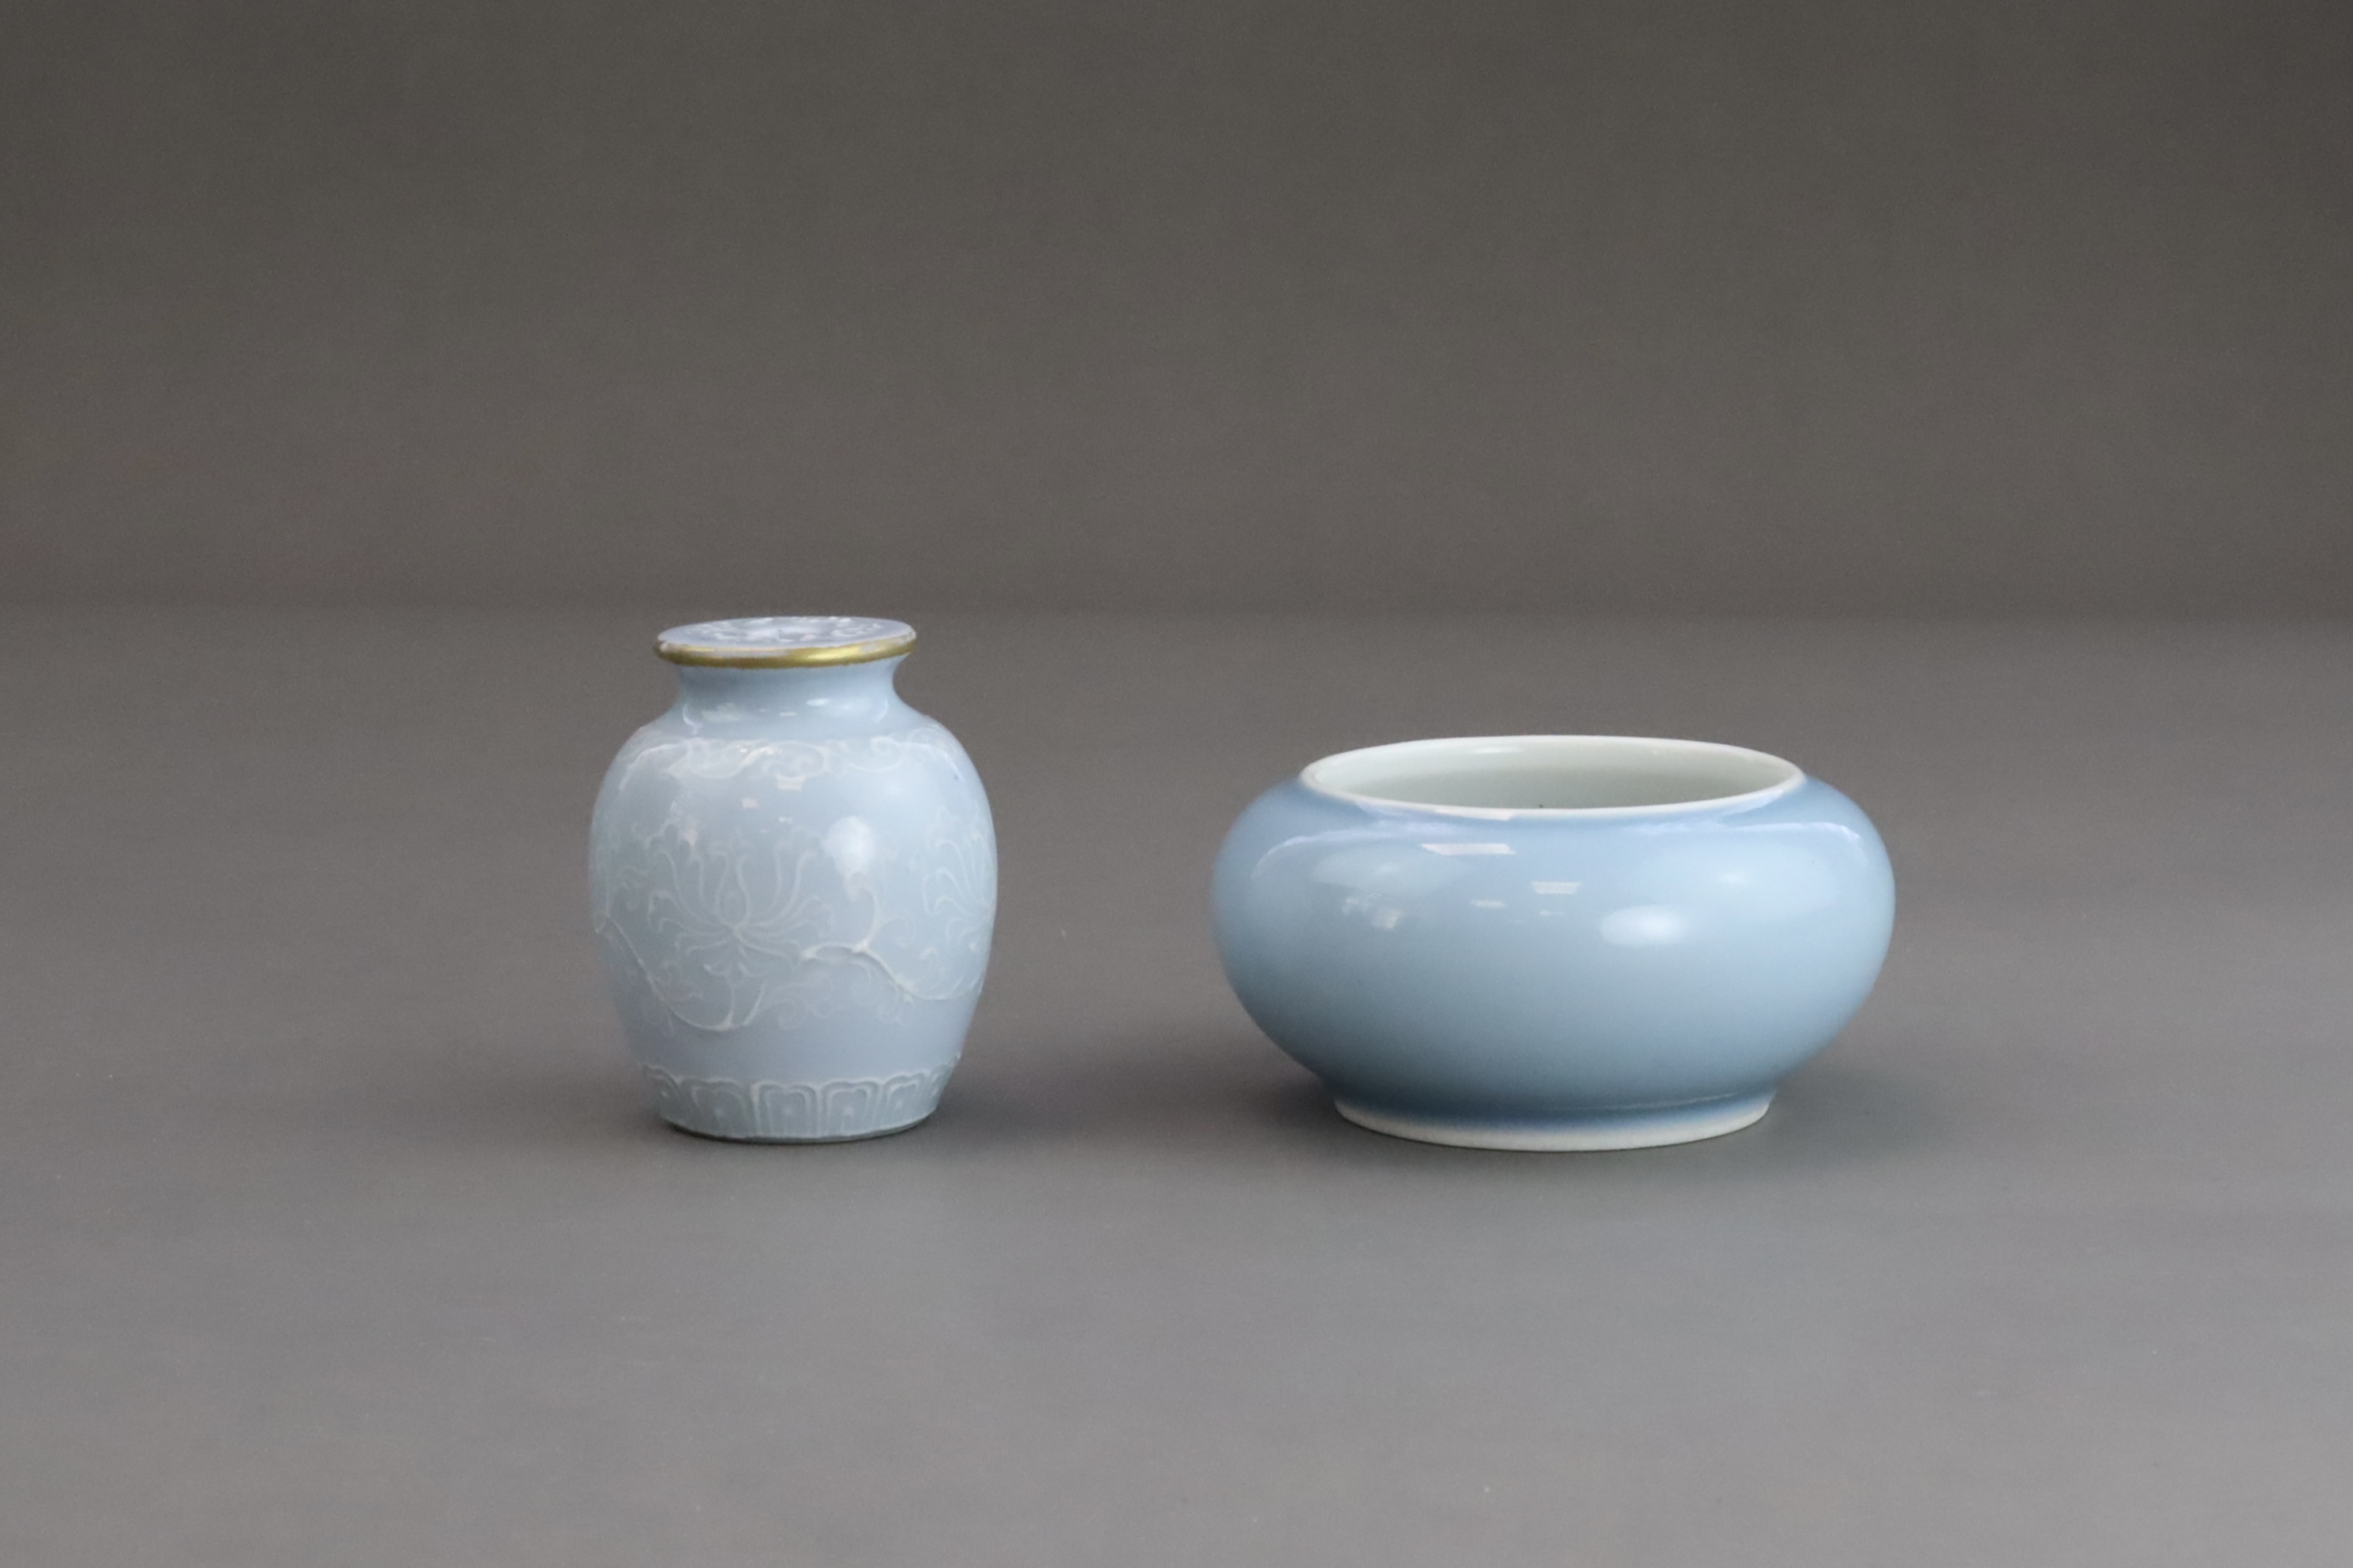  'Clair de lune': A Brushwasher, Guangxu mark and period, and a Moulded small Jar, Qing dynasty - Image 3 of 7